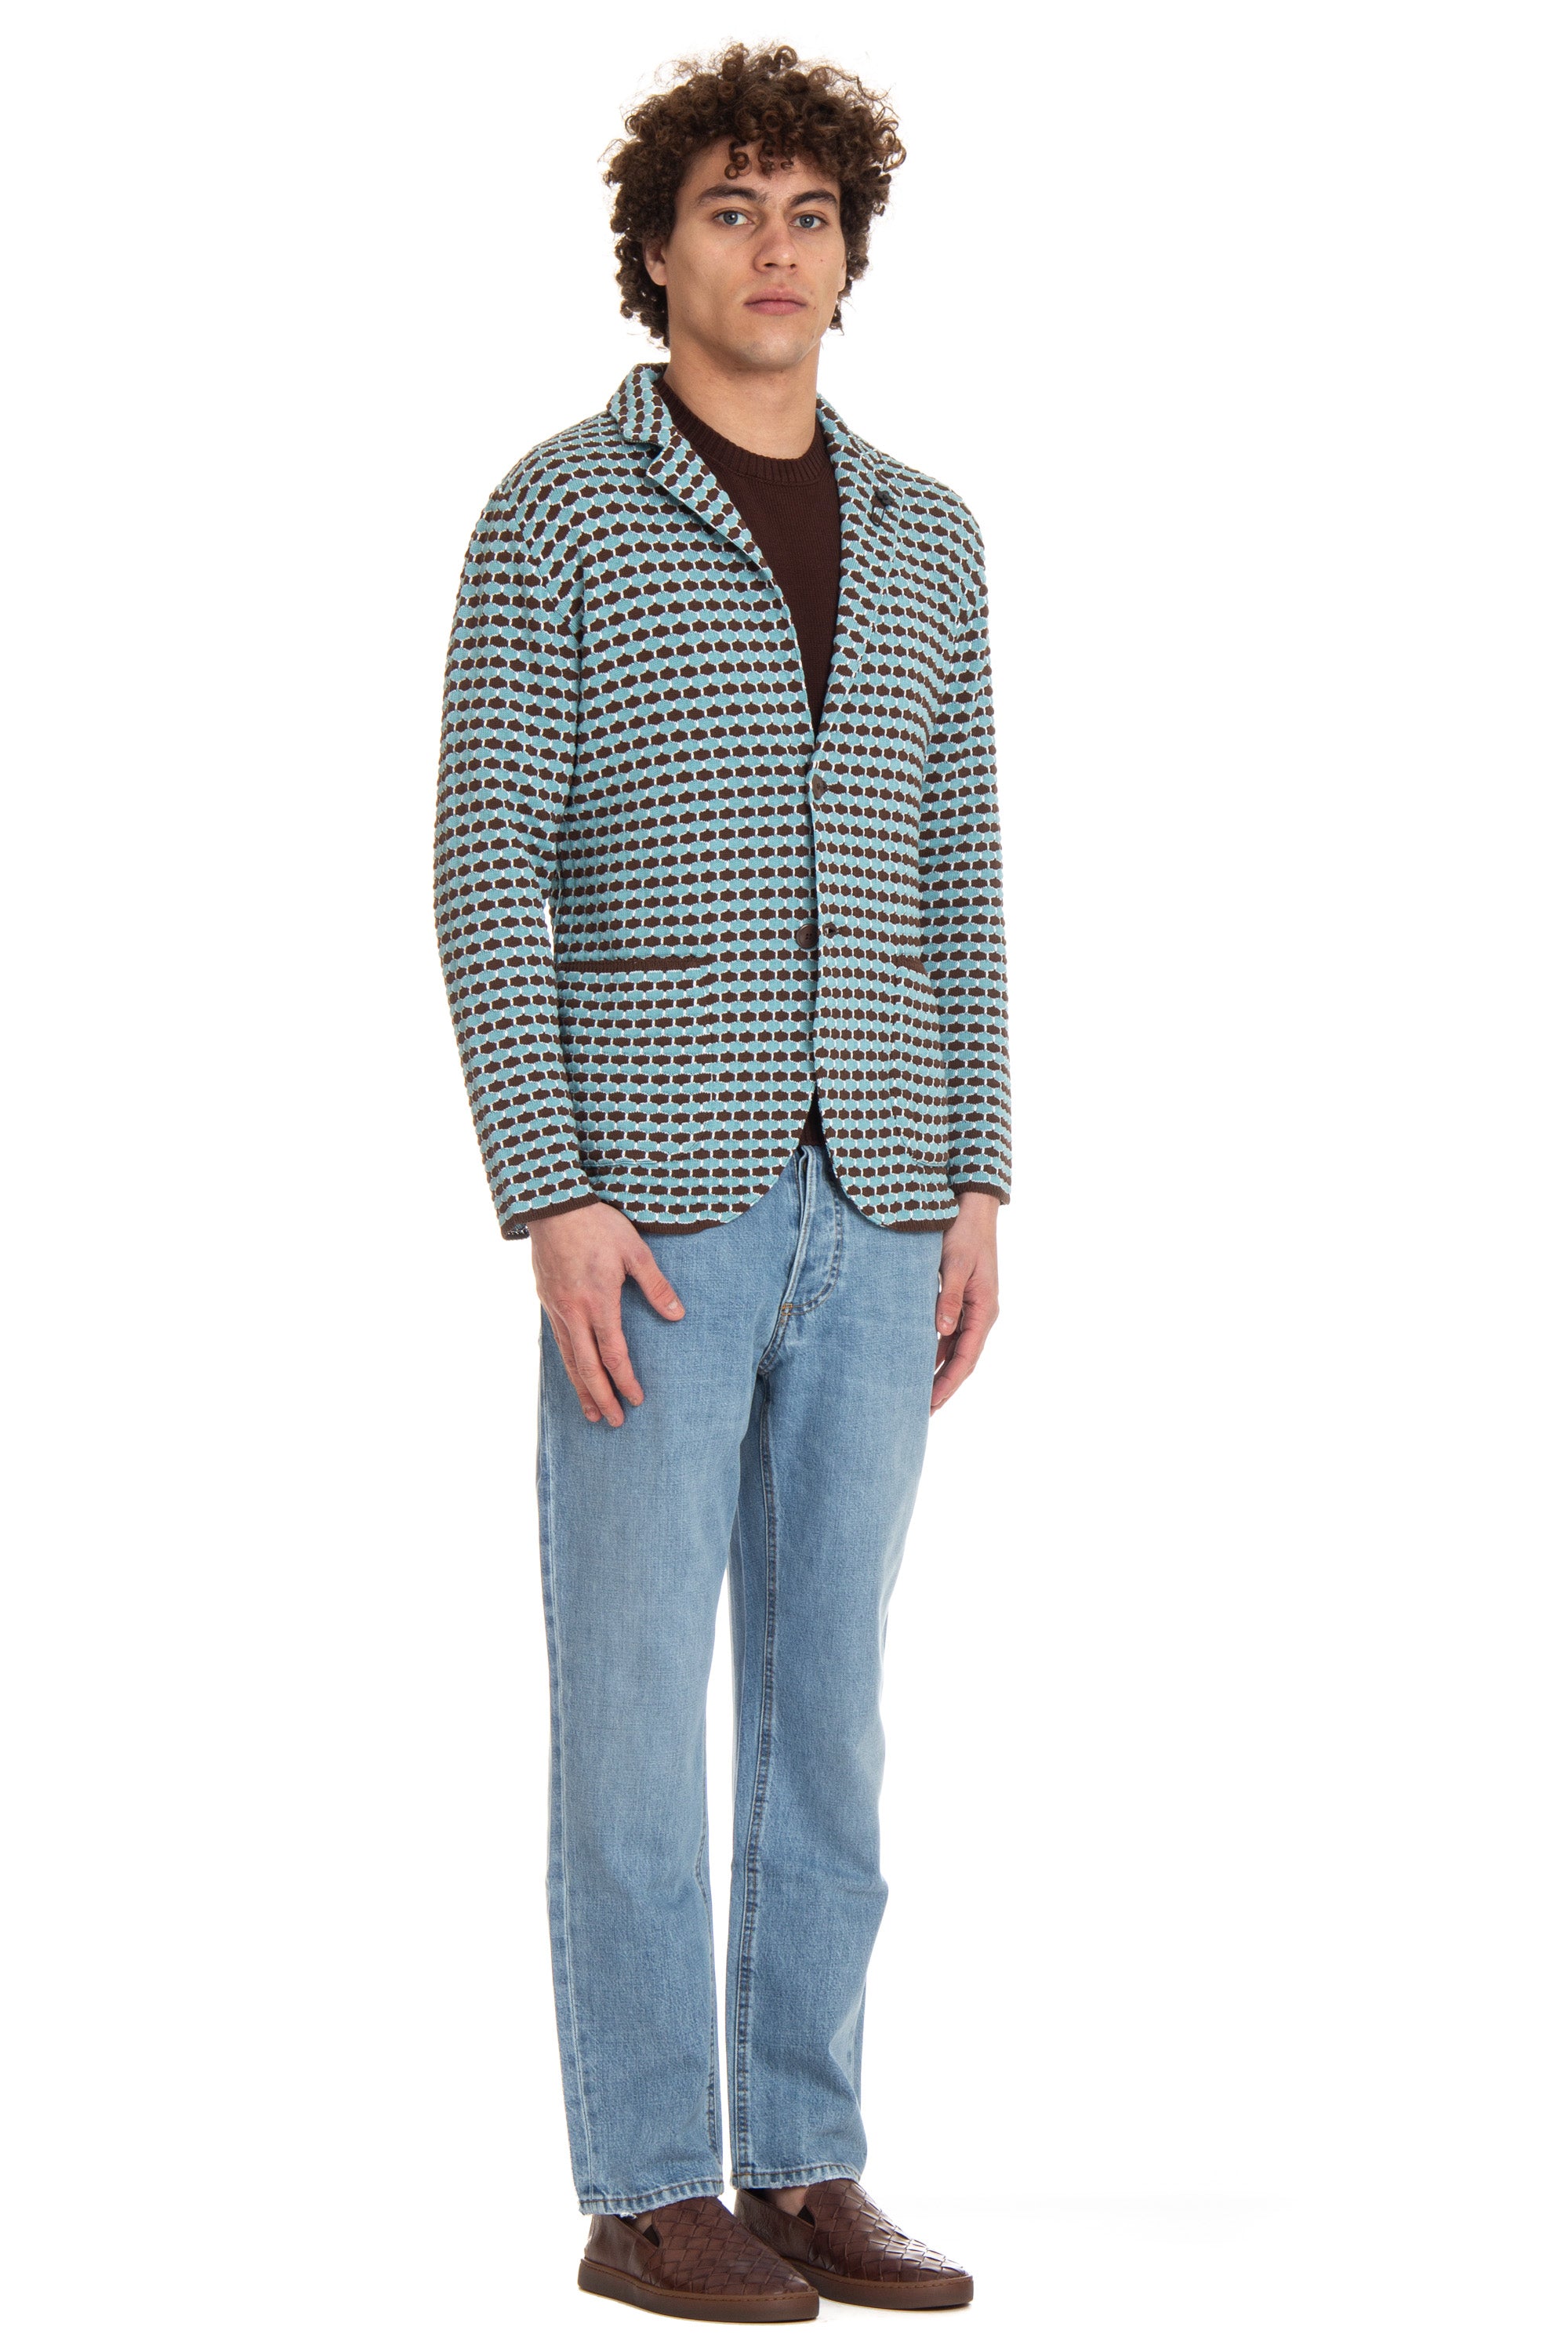 Honeycomb cotton knitted jacket